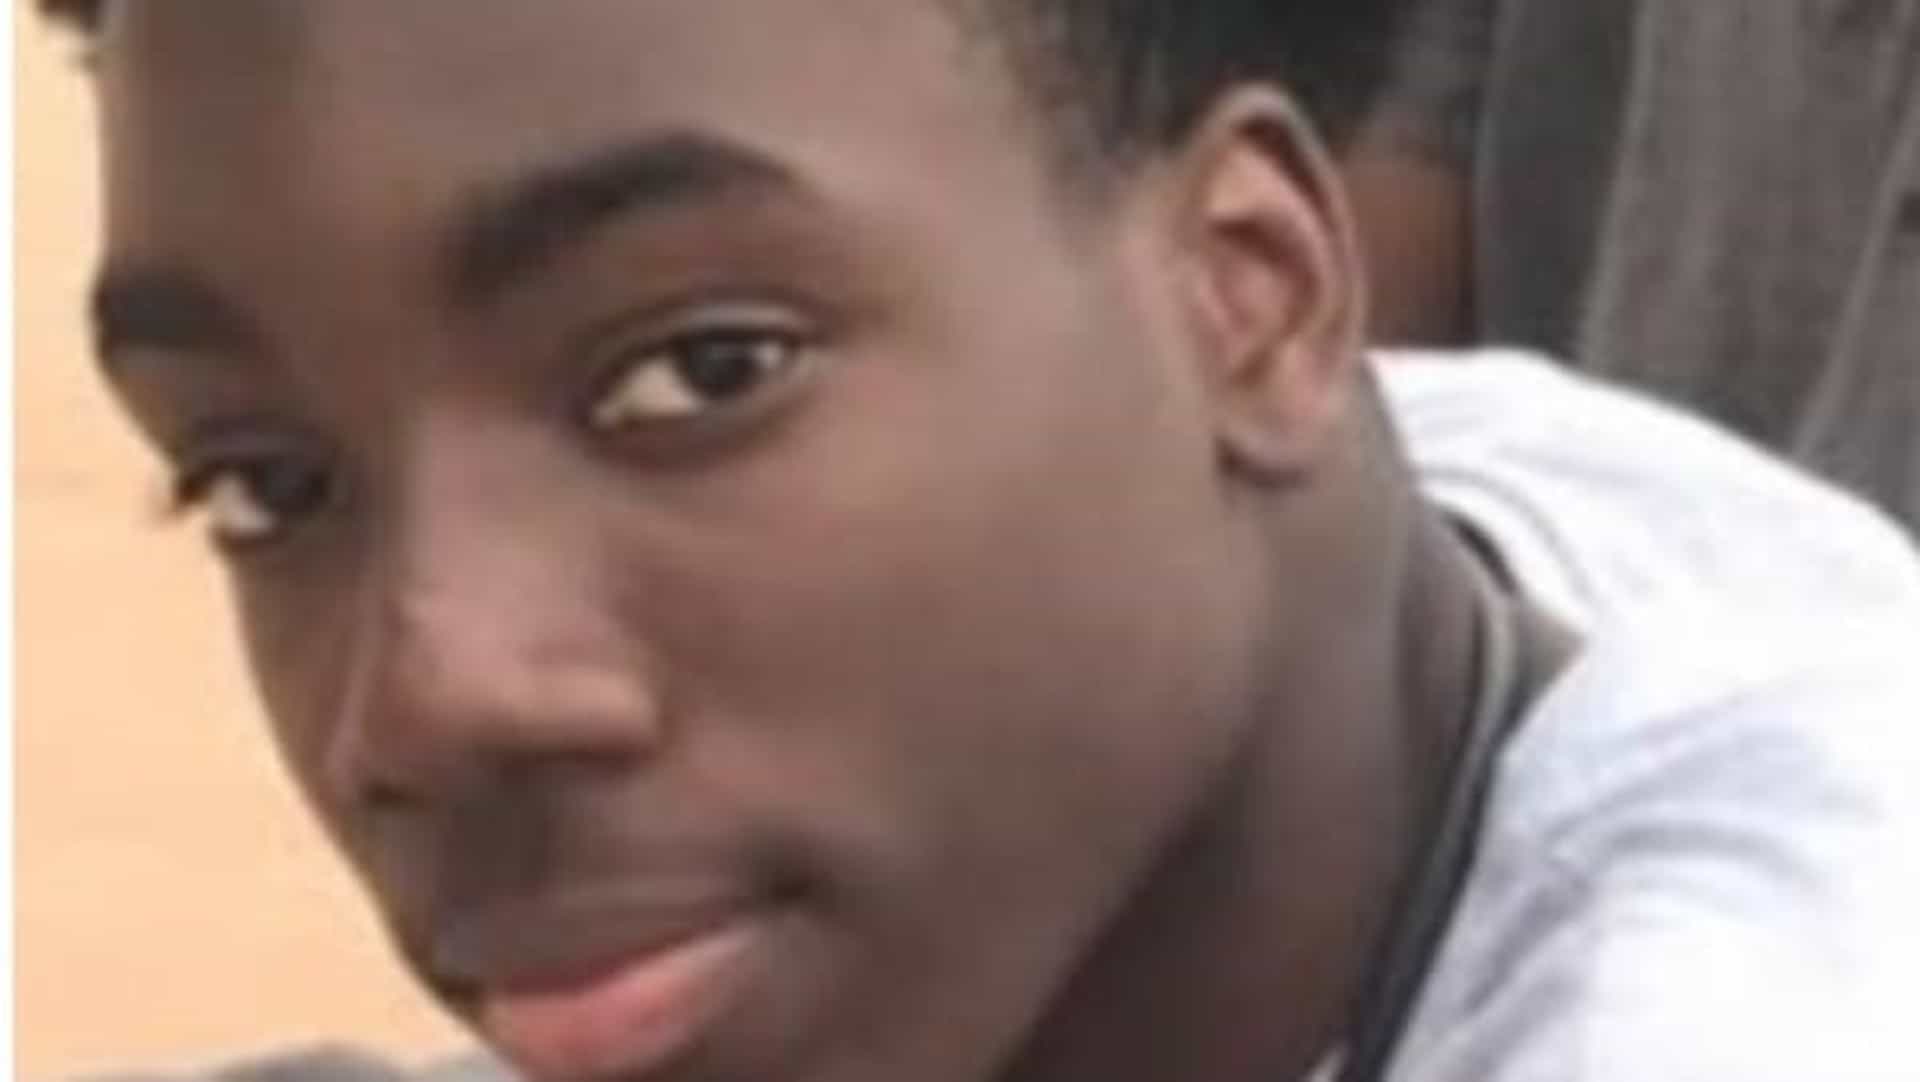 Police confirm body found in Epping Forest lake is Richard Okorogheye